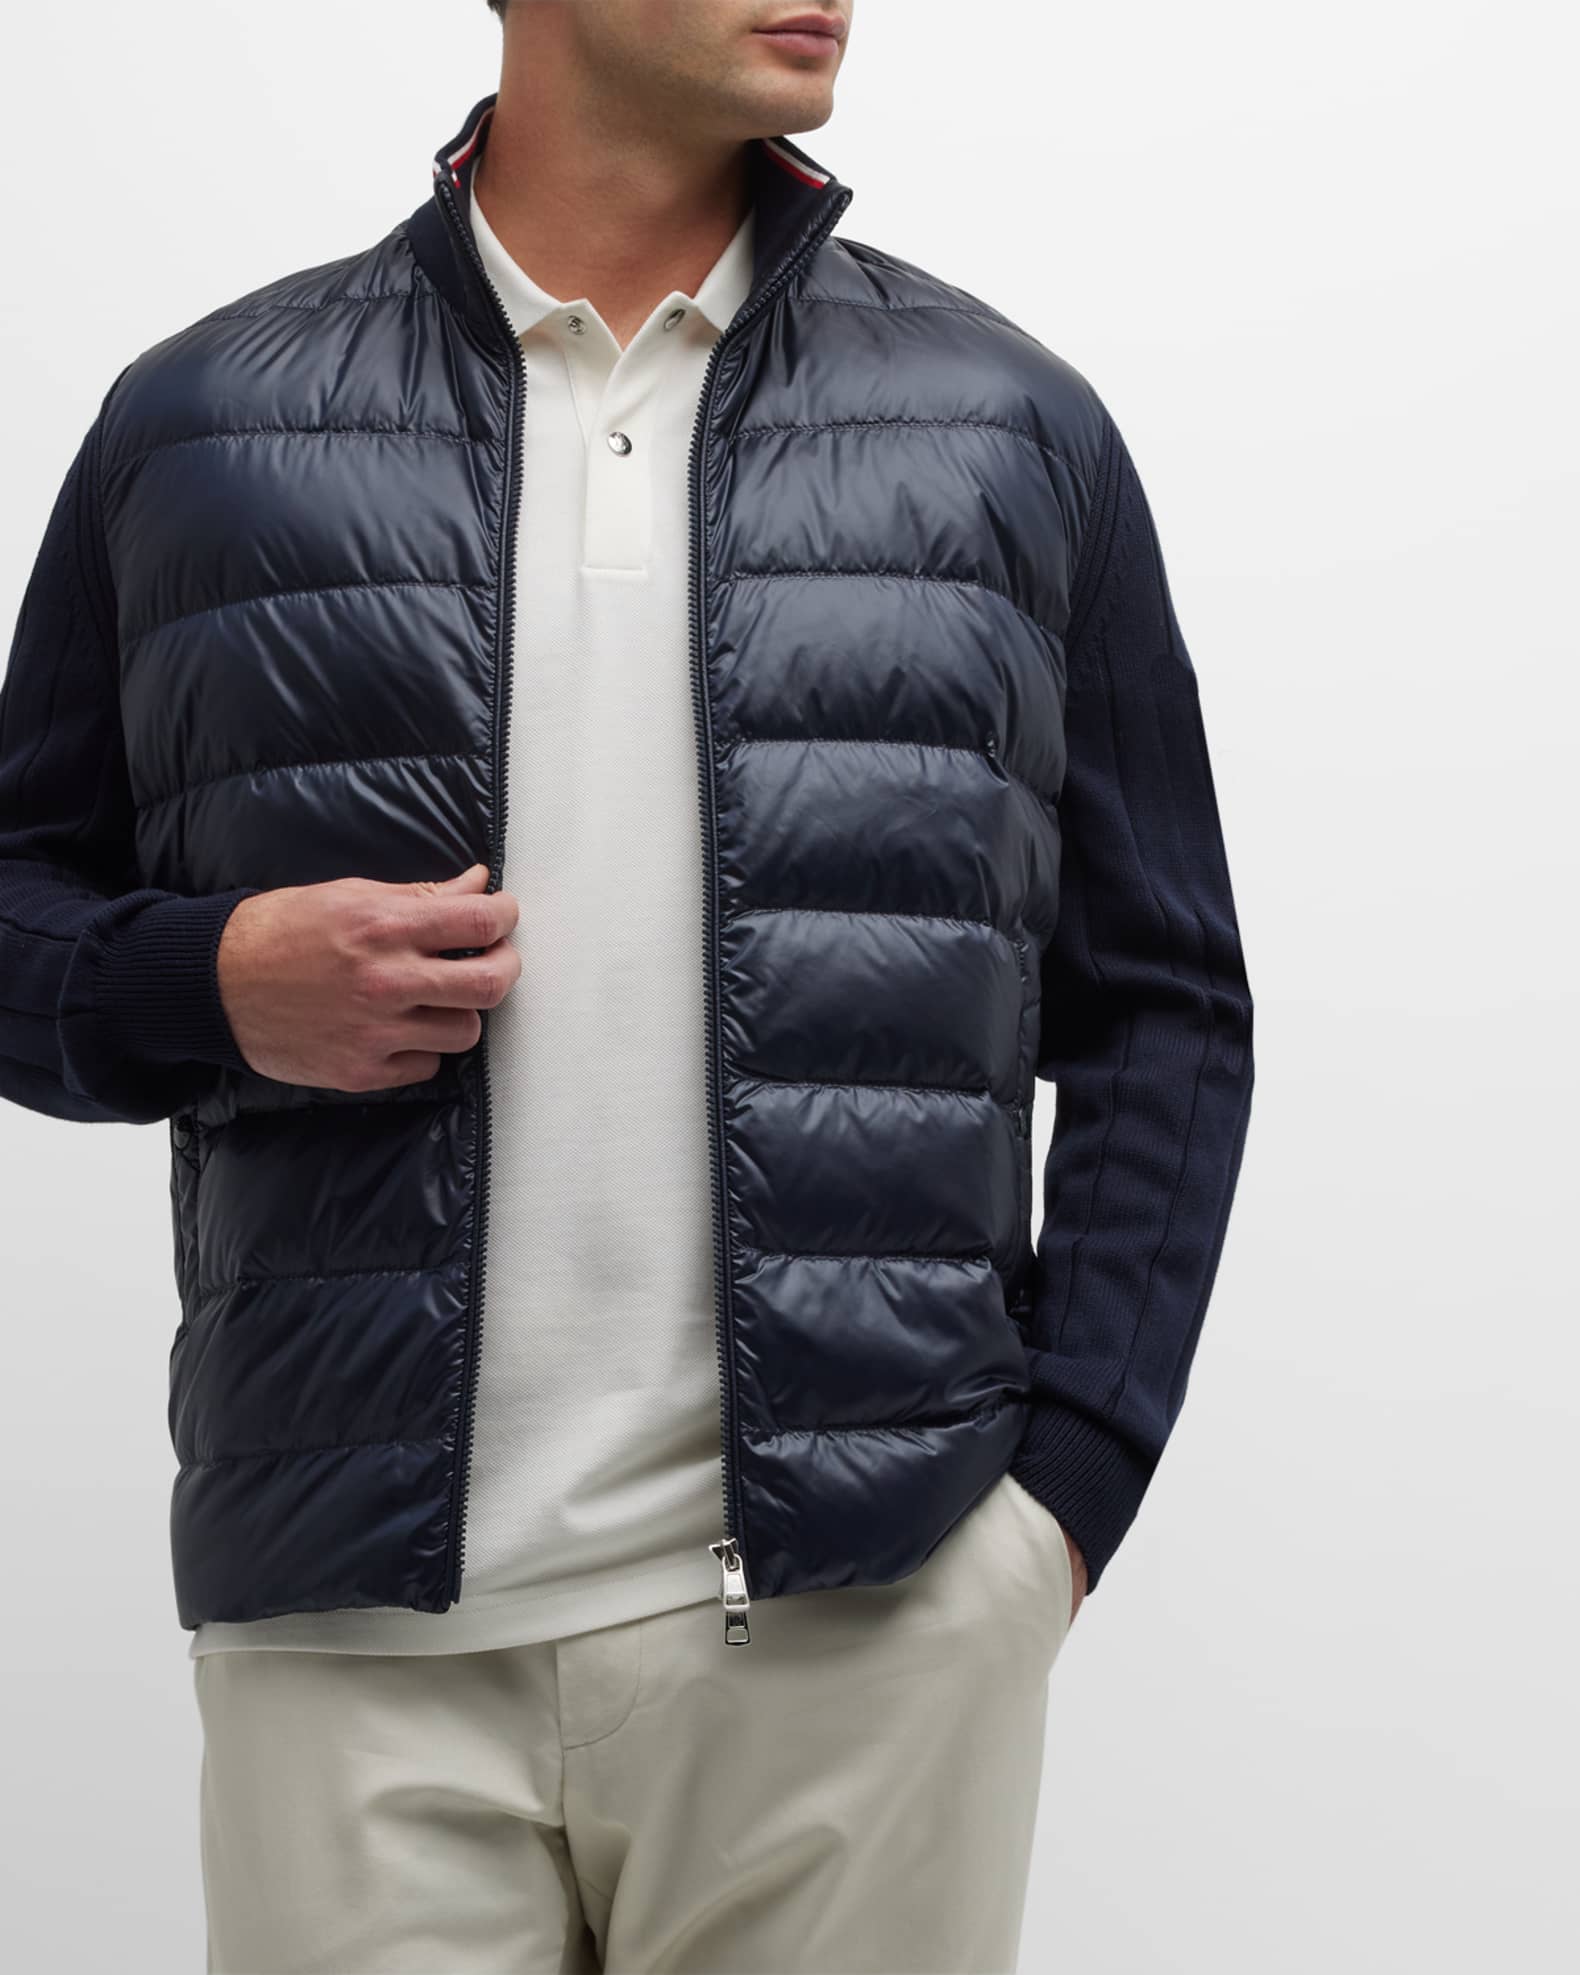 Moncler Men's Archivio Ribbed Jacket with Puffer Body | Neiman Marcus